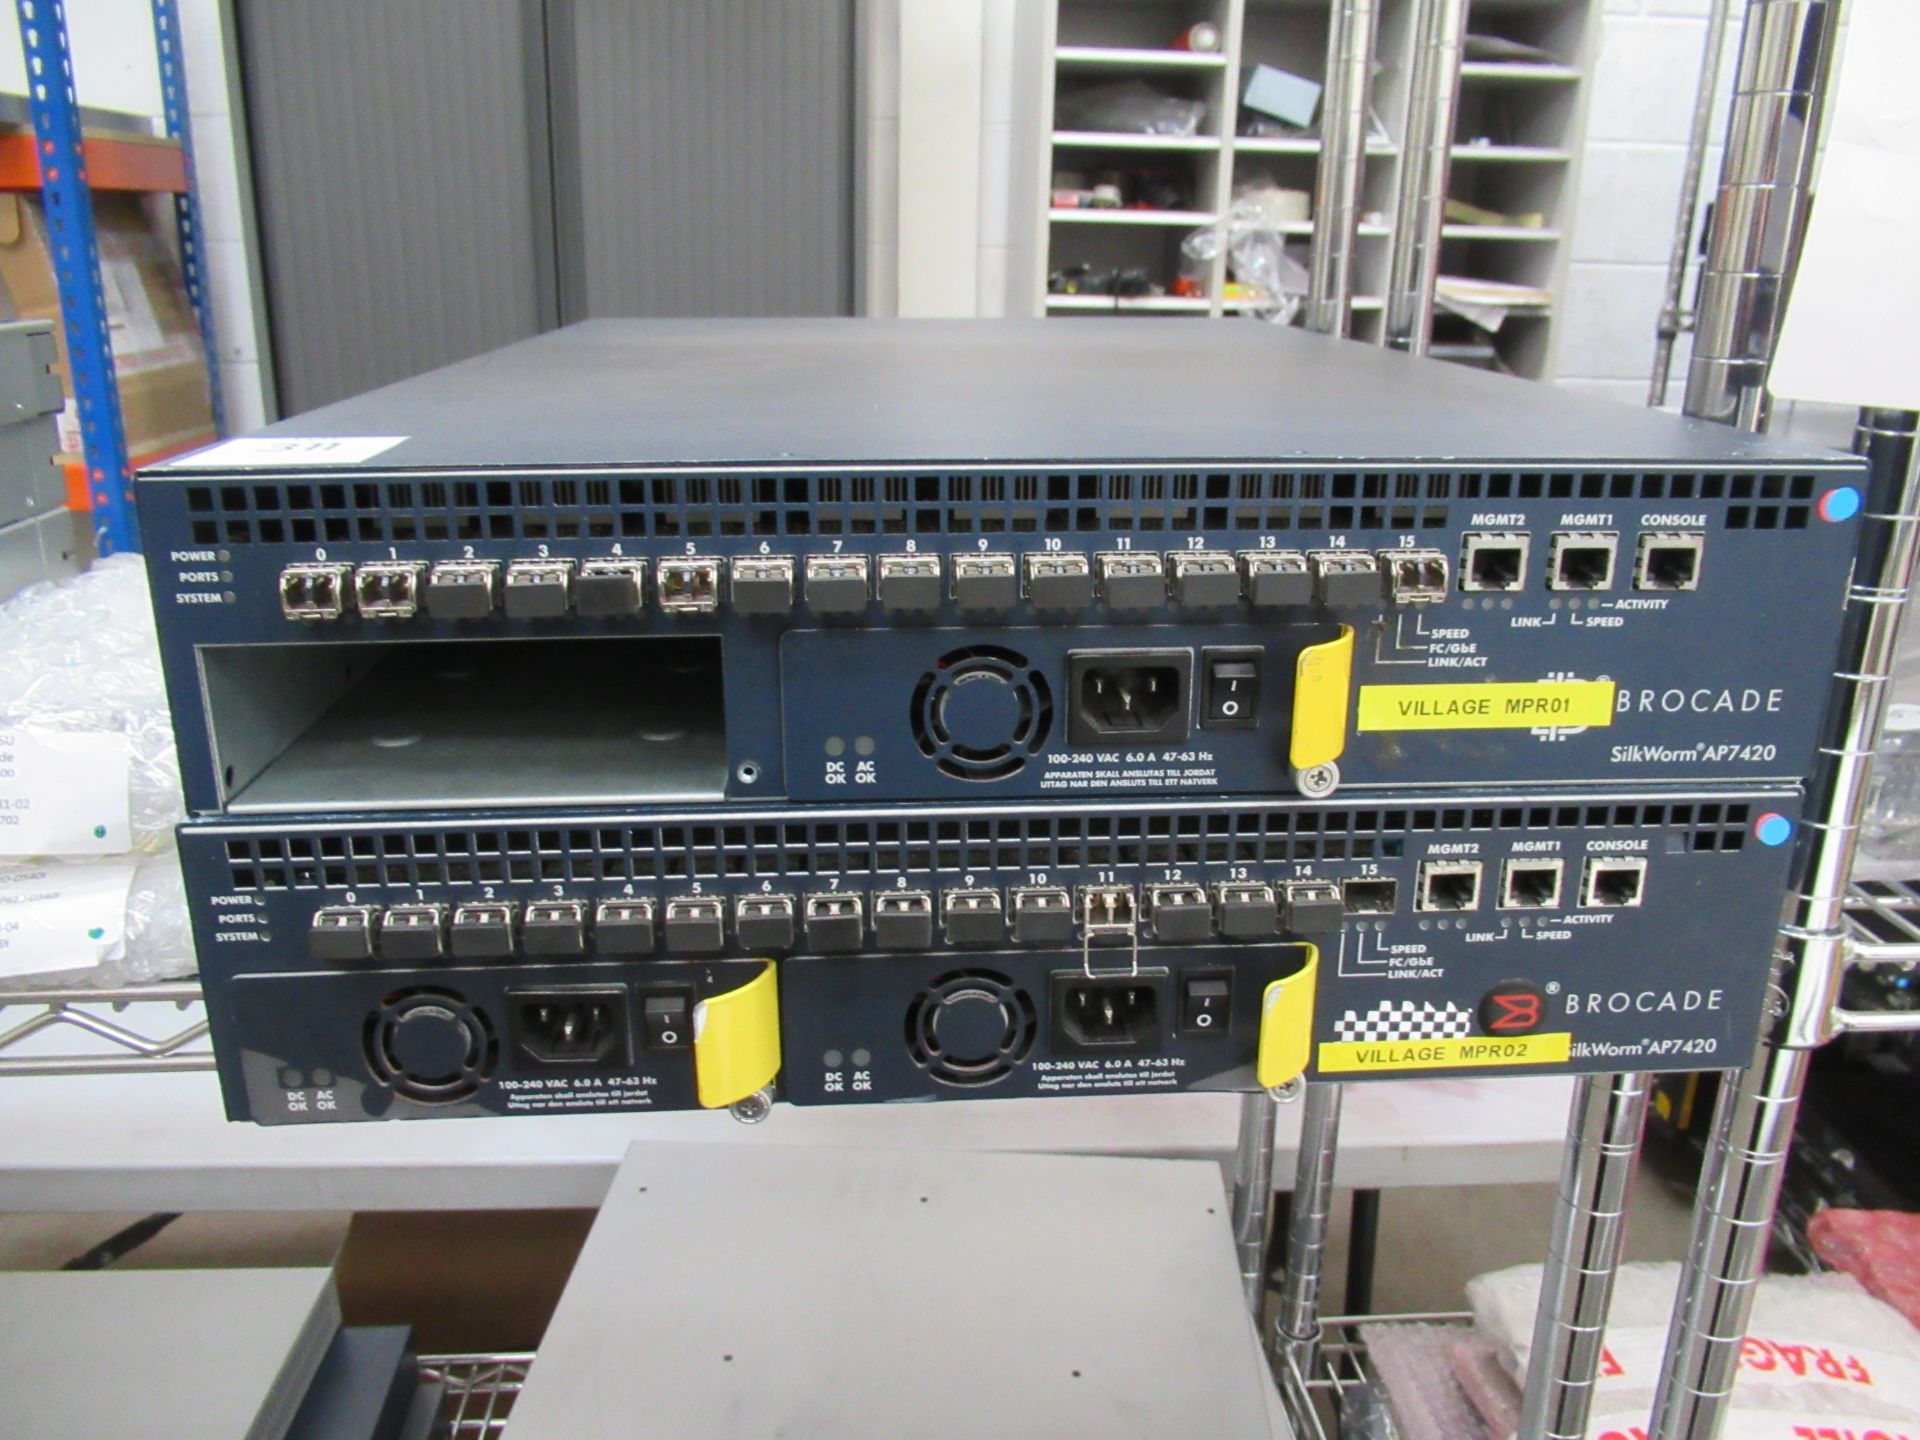 2 x Brocade AP7420 Switch, 2 x H3C S550 Series Ethernet Switch with CX4 Coupling Cable, 3 x - Image 4 of 38